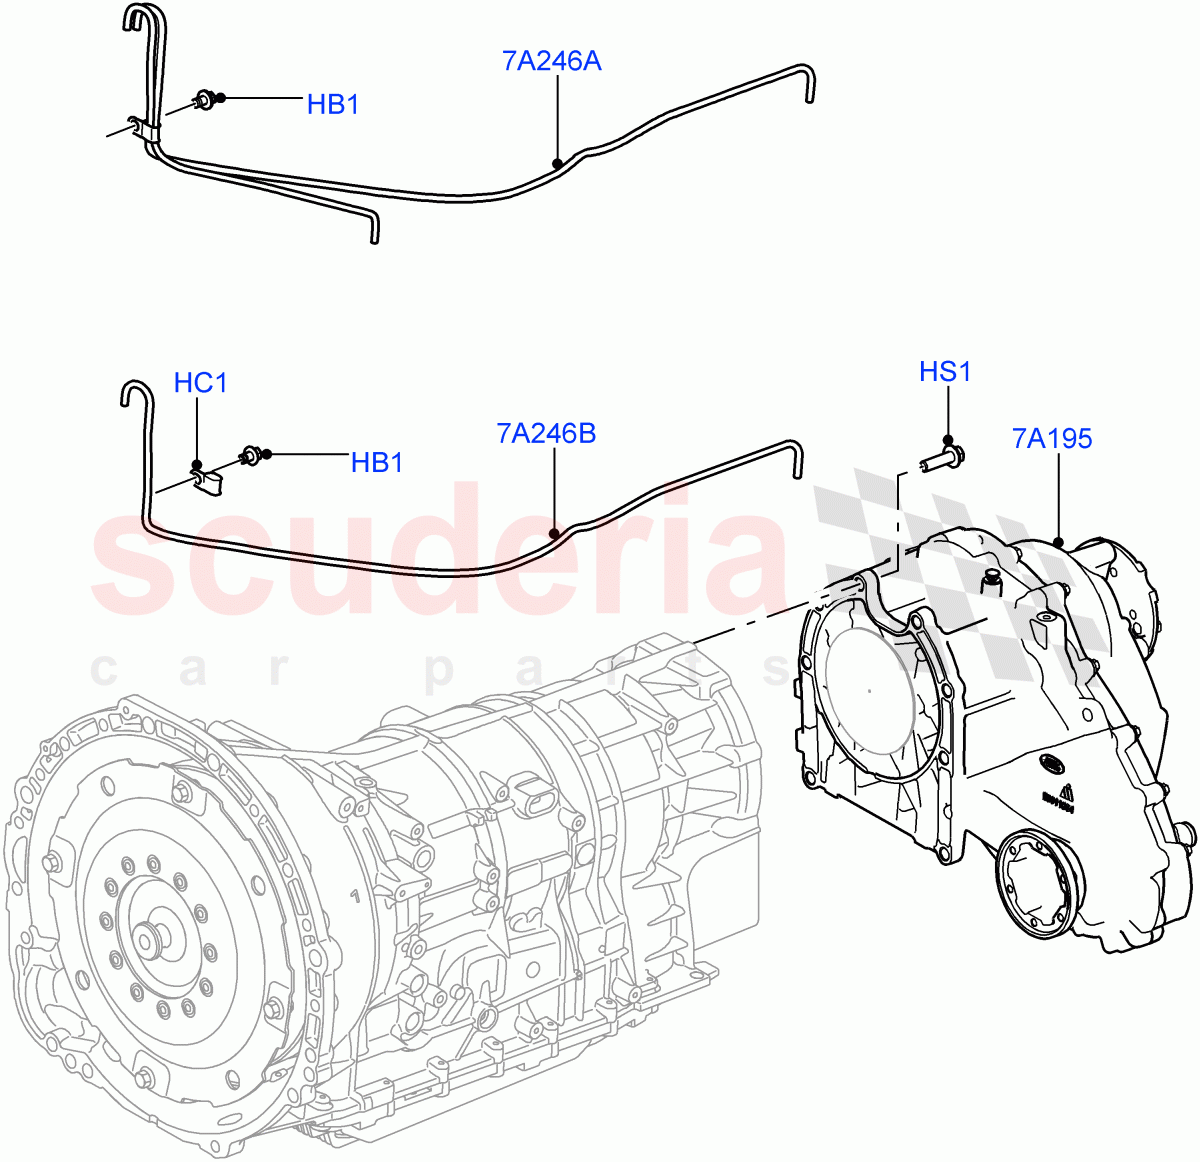 Transfer Drive Case(8 Speed Auto Trans ZF 8HP70 4WD,With 1 Speed Transfer Case,8 Speed Auto Trans ZF 8HP45)((V)FROMEA000001,(V)TOGA999999) of Land Rover Land Rover Range Rover (2012-2021) [2.0 Turbo Petrol AJ200P]